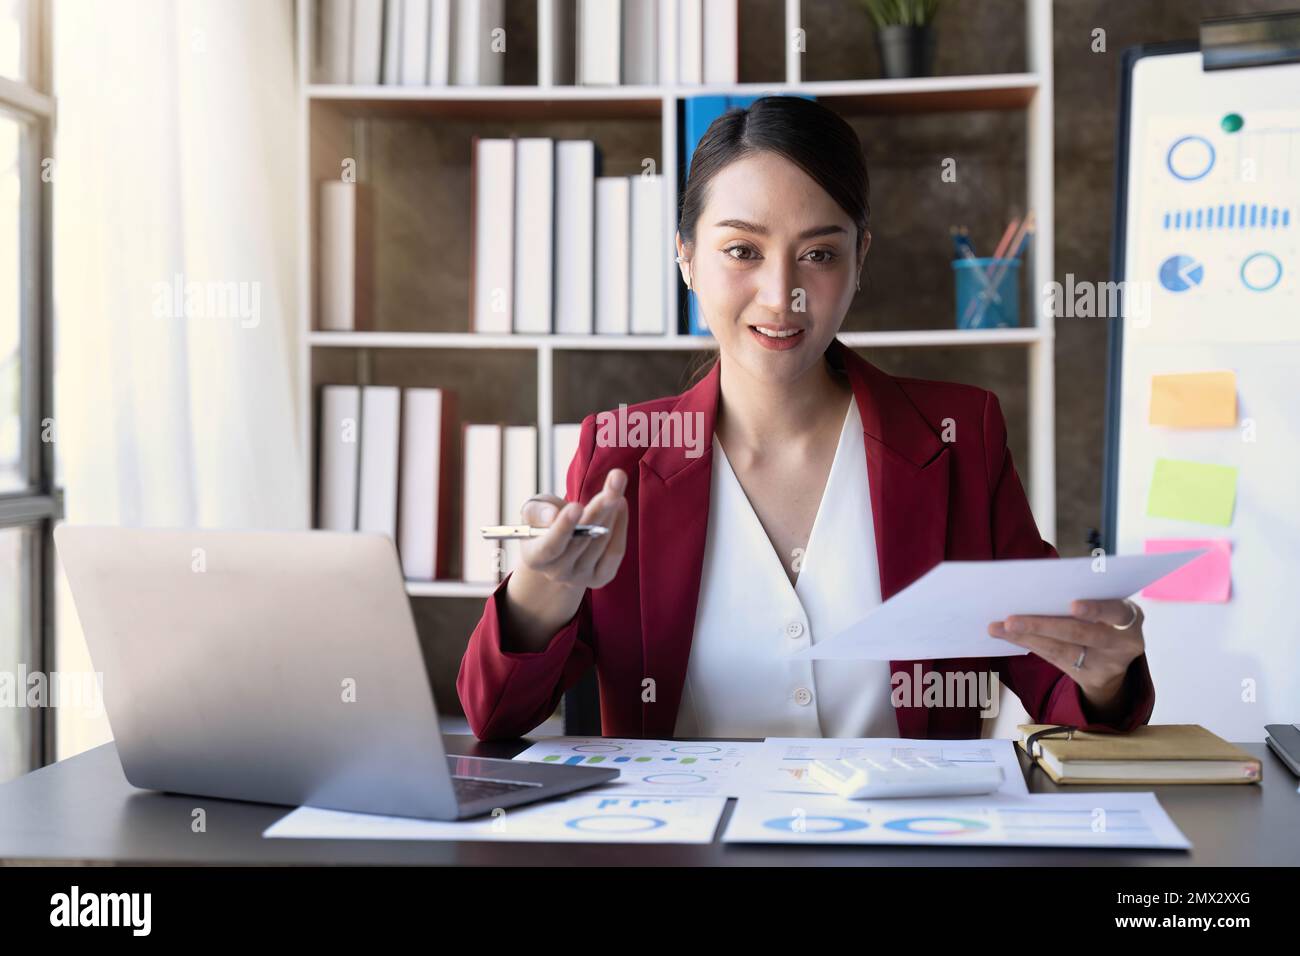 woman having documents a business in hand and signing a contract, recruitment or agreement Stock Photo